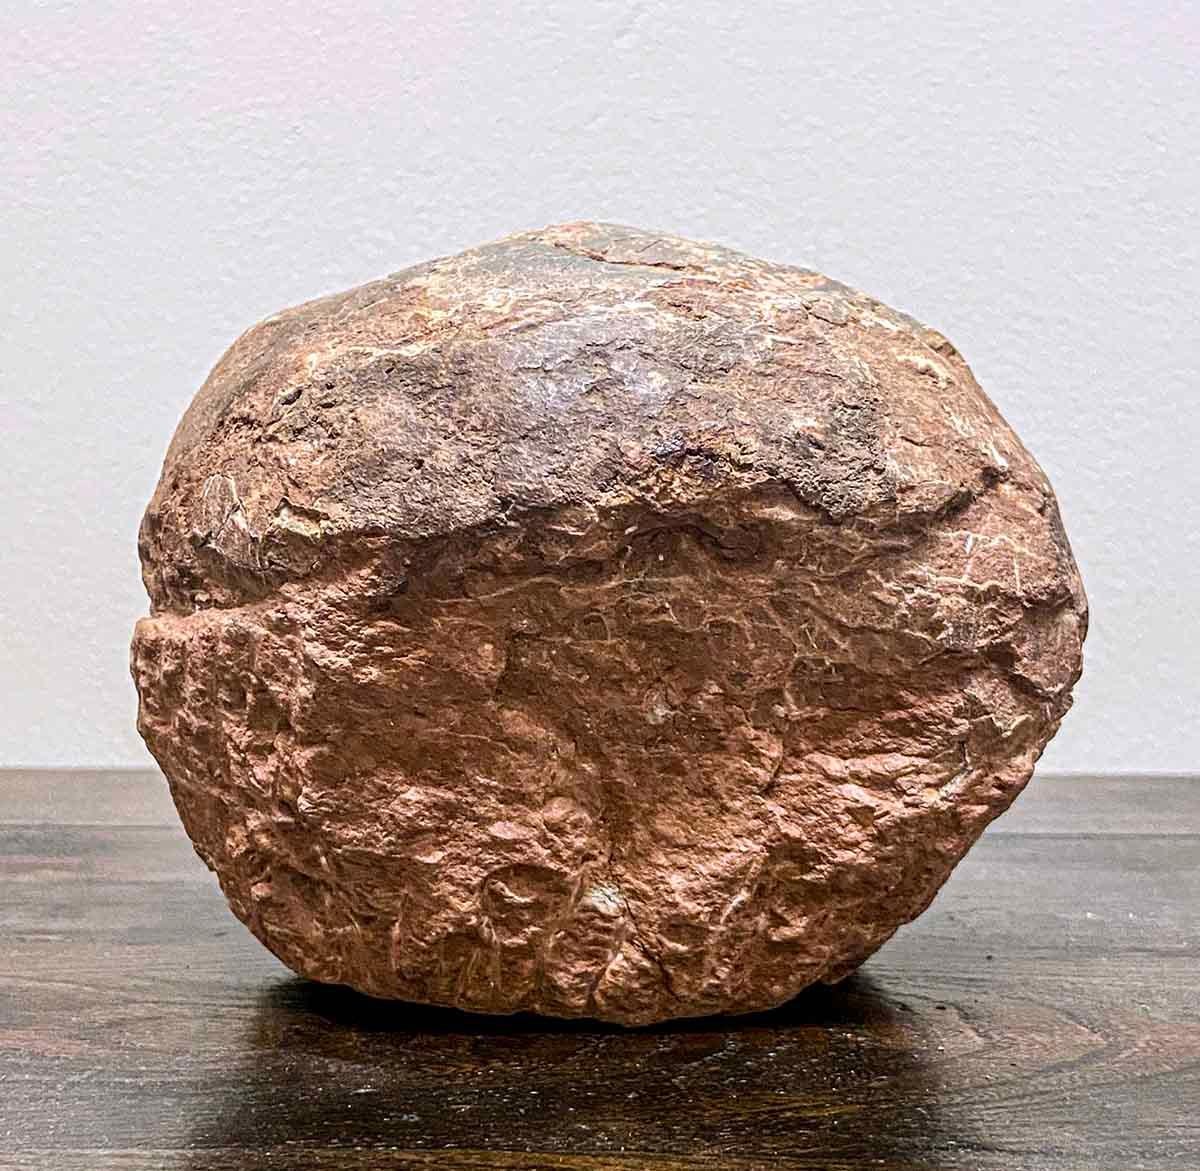 A Chinese petrified dinosaur egg from the Henan Provence. Boasting a nicely weathered appearance easily explained by its tremendous age, this petrified dinosaur egg will make for an excellent gift idea! With its ovoid shape and cracked surface, this